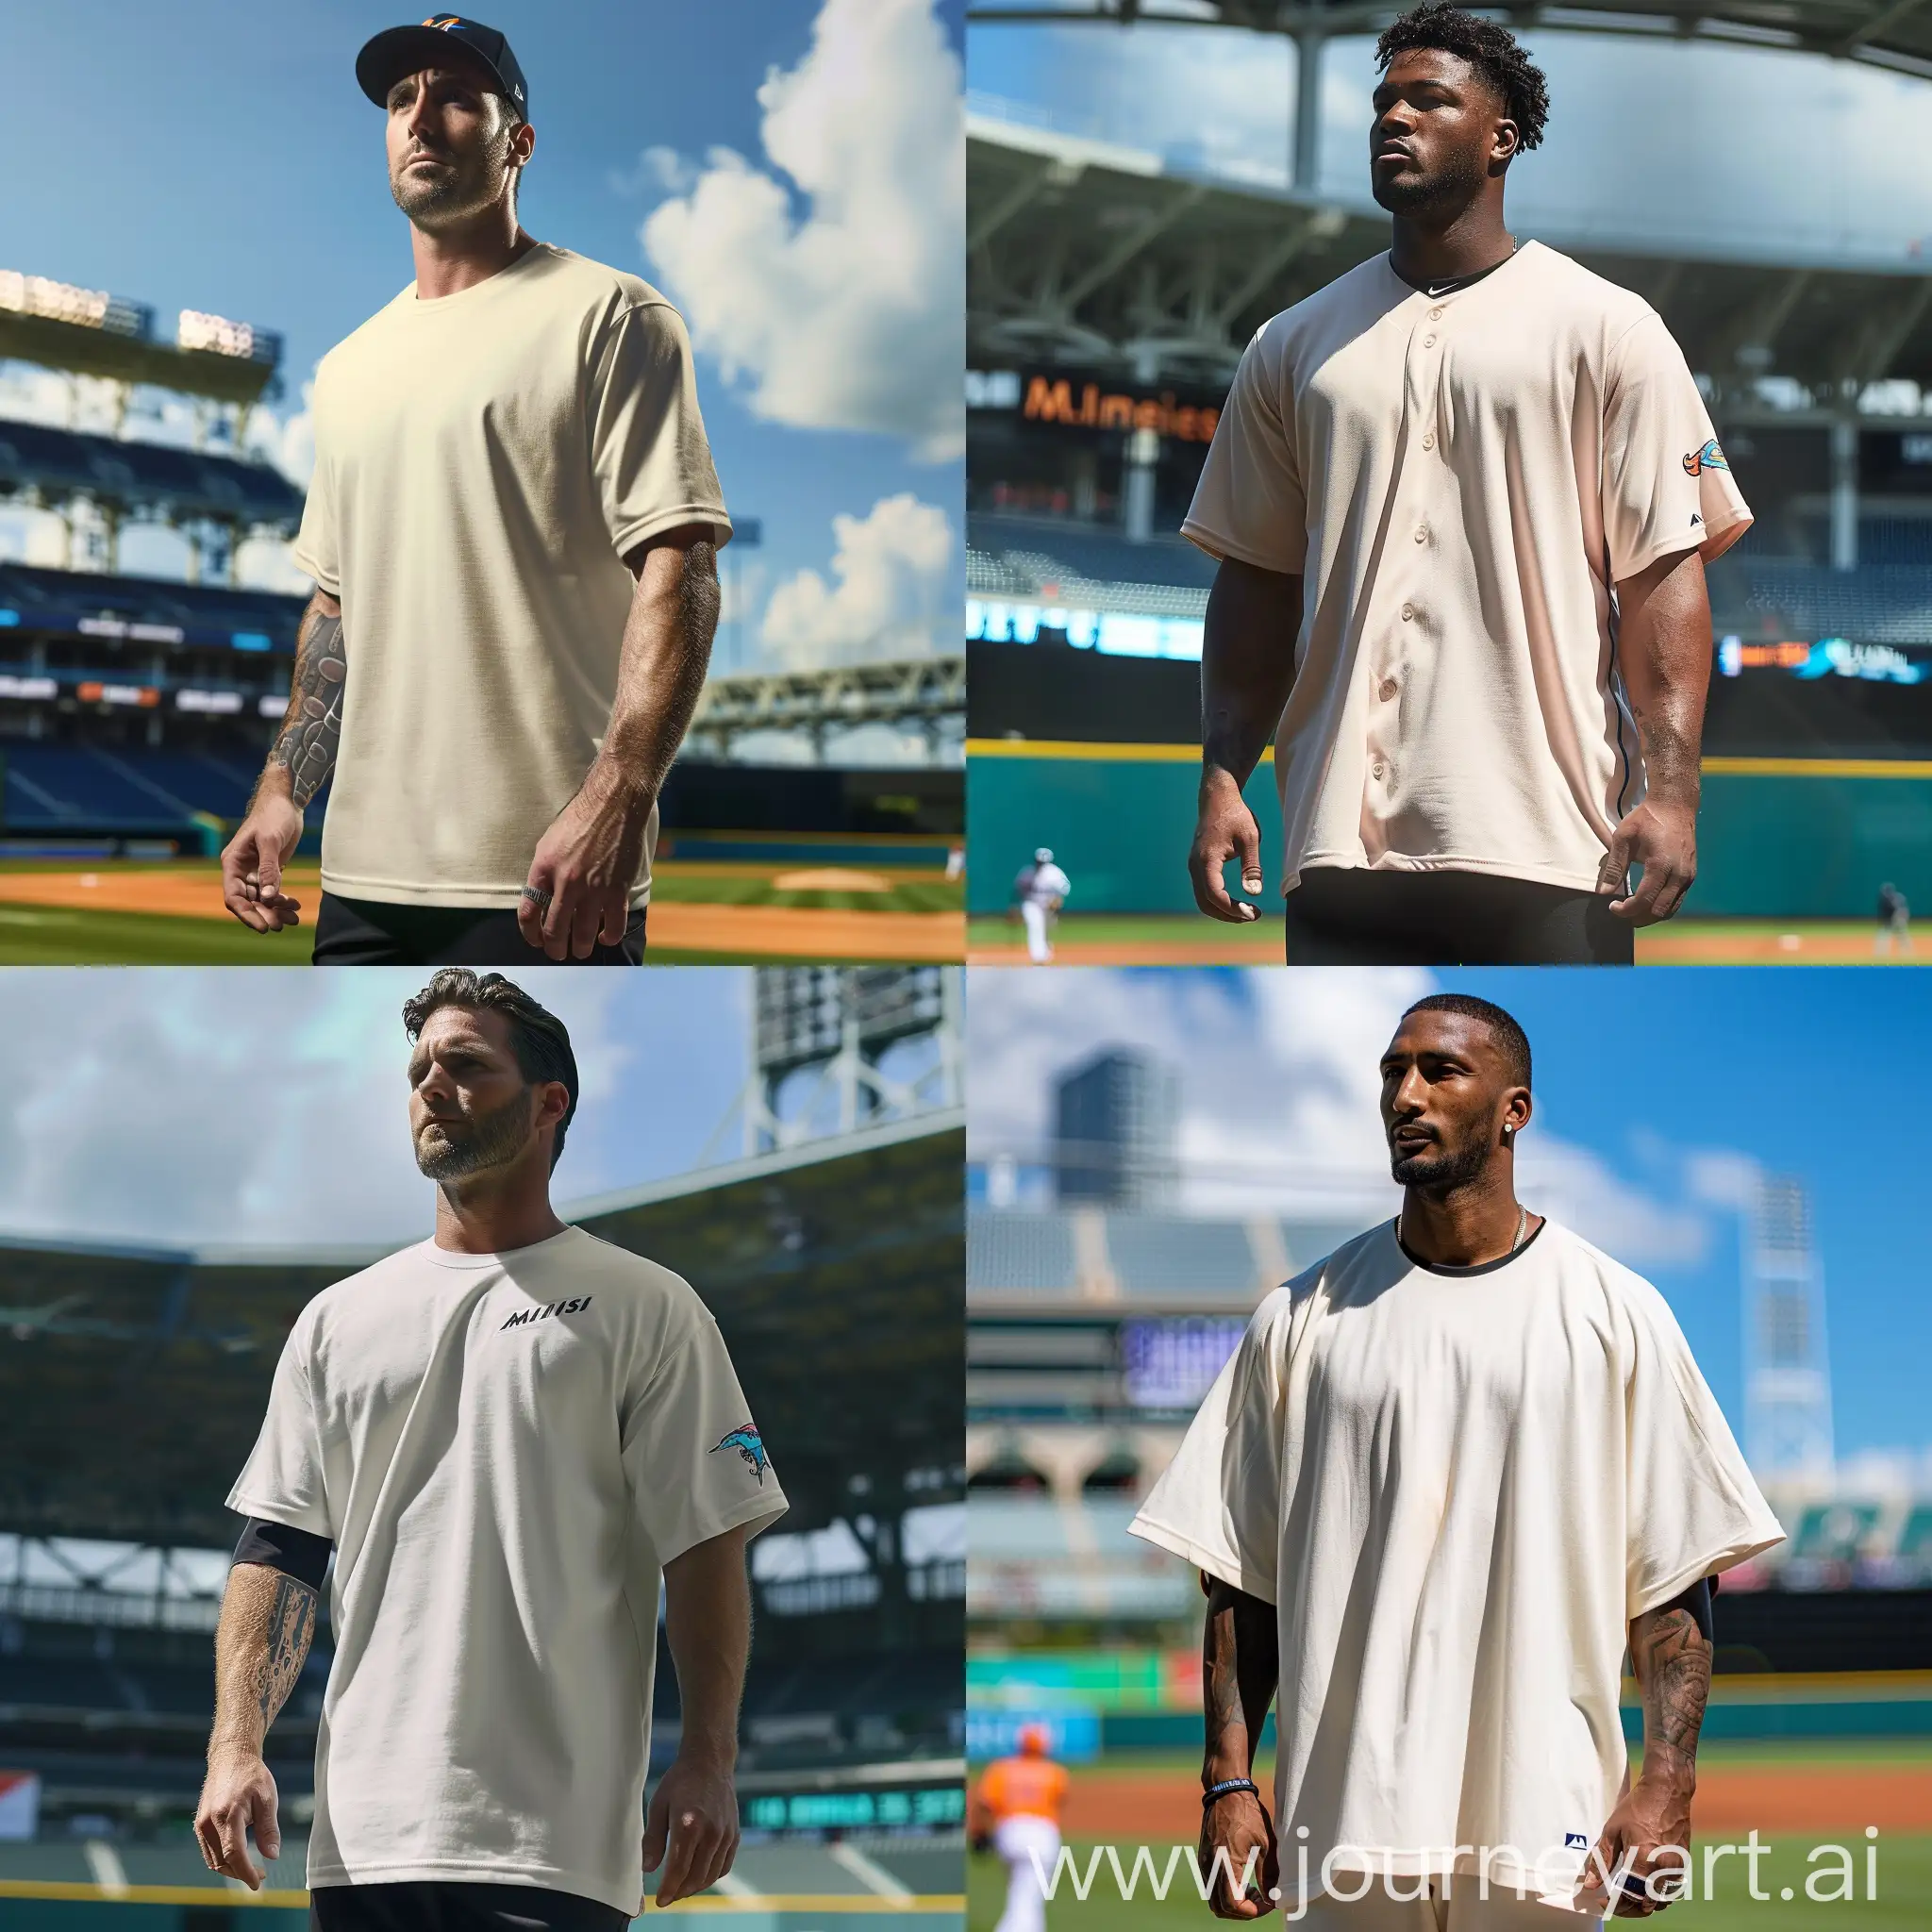 Realistic image of Miami Marlins baseball player Ian Lewis in a oversized drop shoulder heavyweight cream colored t shirt. standing on a baseball field